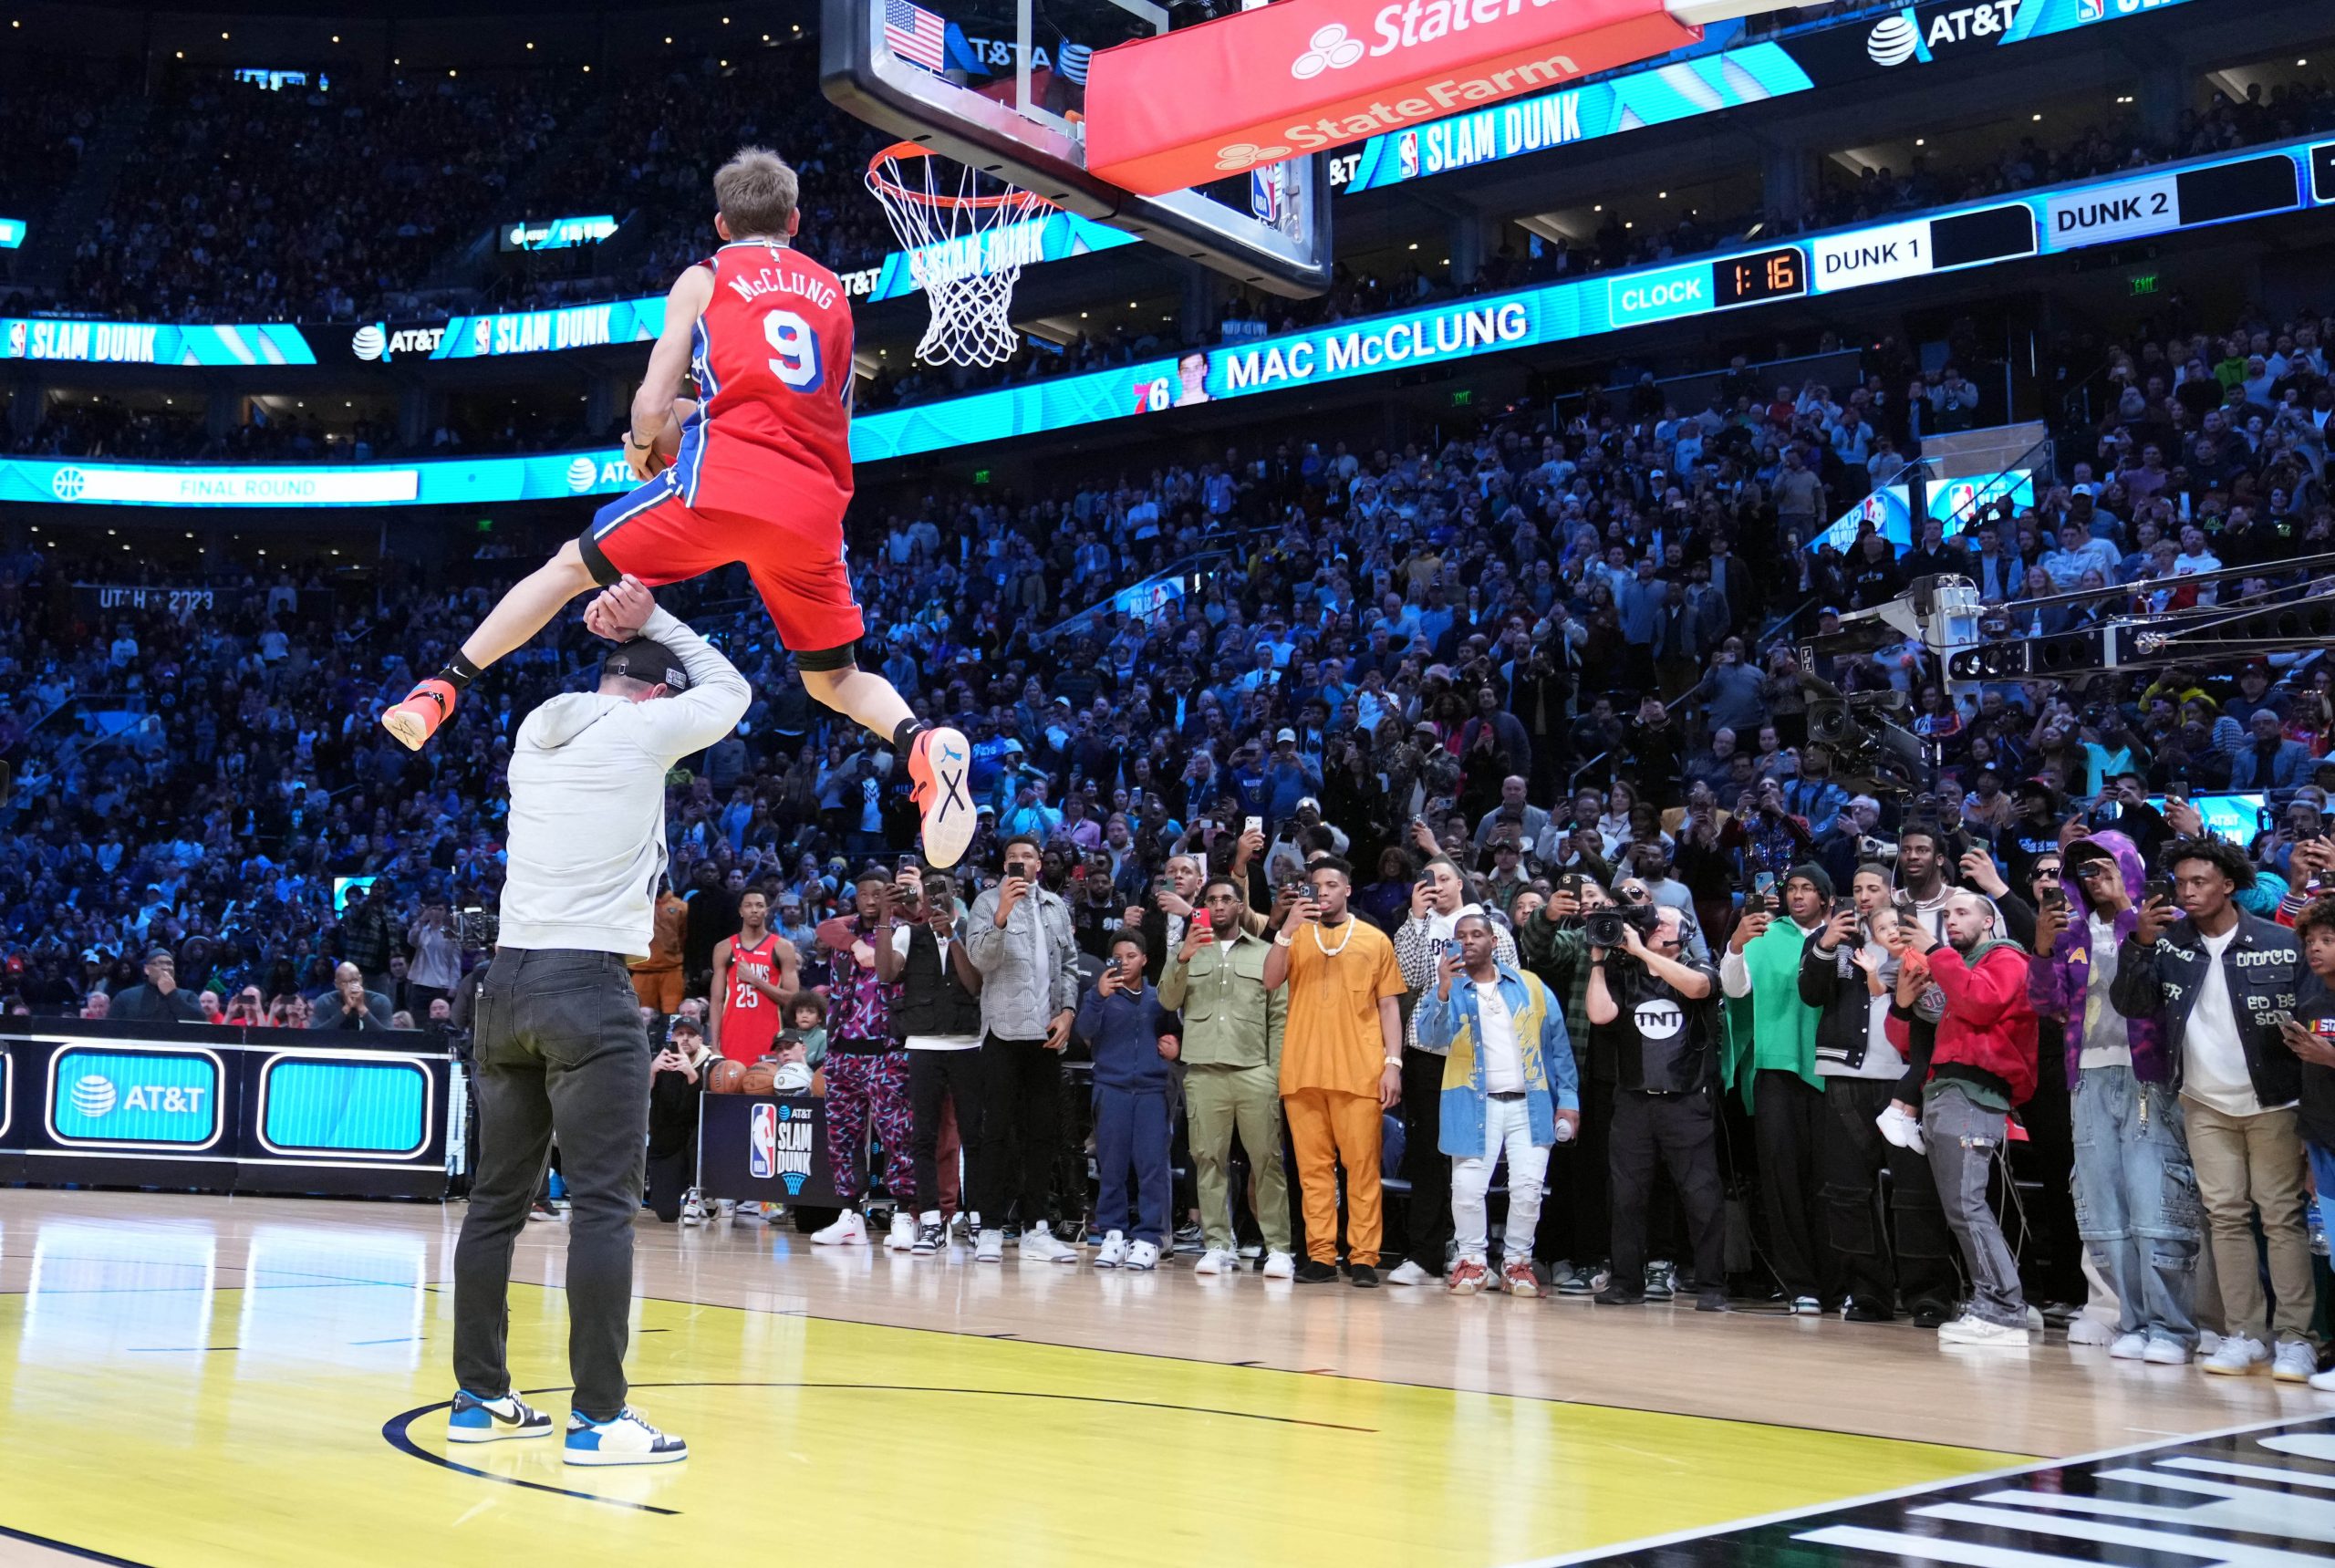 Feb 18, 2023; Salt Lake City, UT, USA; Philadelphia 76ers guard Mac McClung (9) competes in the Dunk Contest during the 2023 All Star Saturday Night at Vivint Arena. Mandatory Credit: Kyle Terada-USA TODAY Sports Photo: Kyle Terada/REUTERS